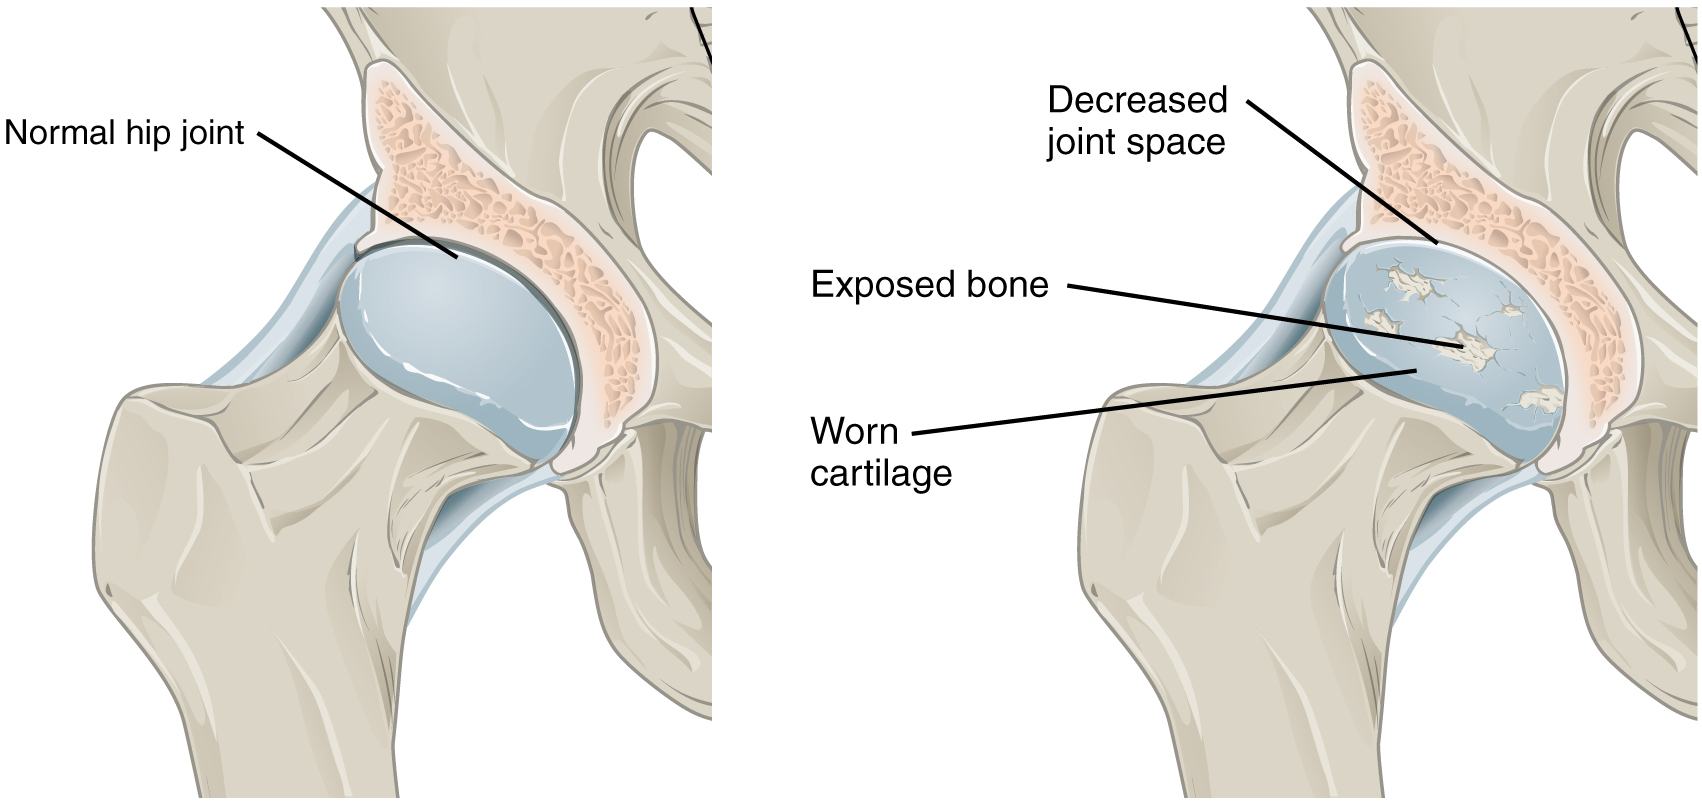 The top panel in this figure shows a normal hip joint, and the bottom panel shows a hip joint with osteoarthritis.